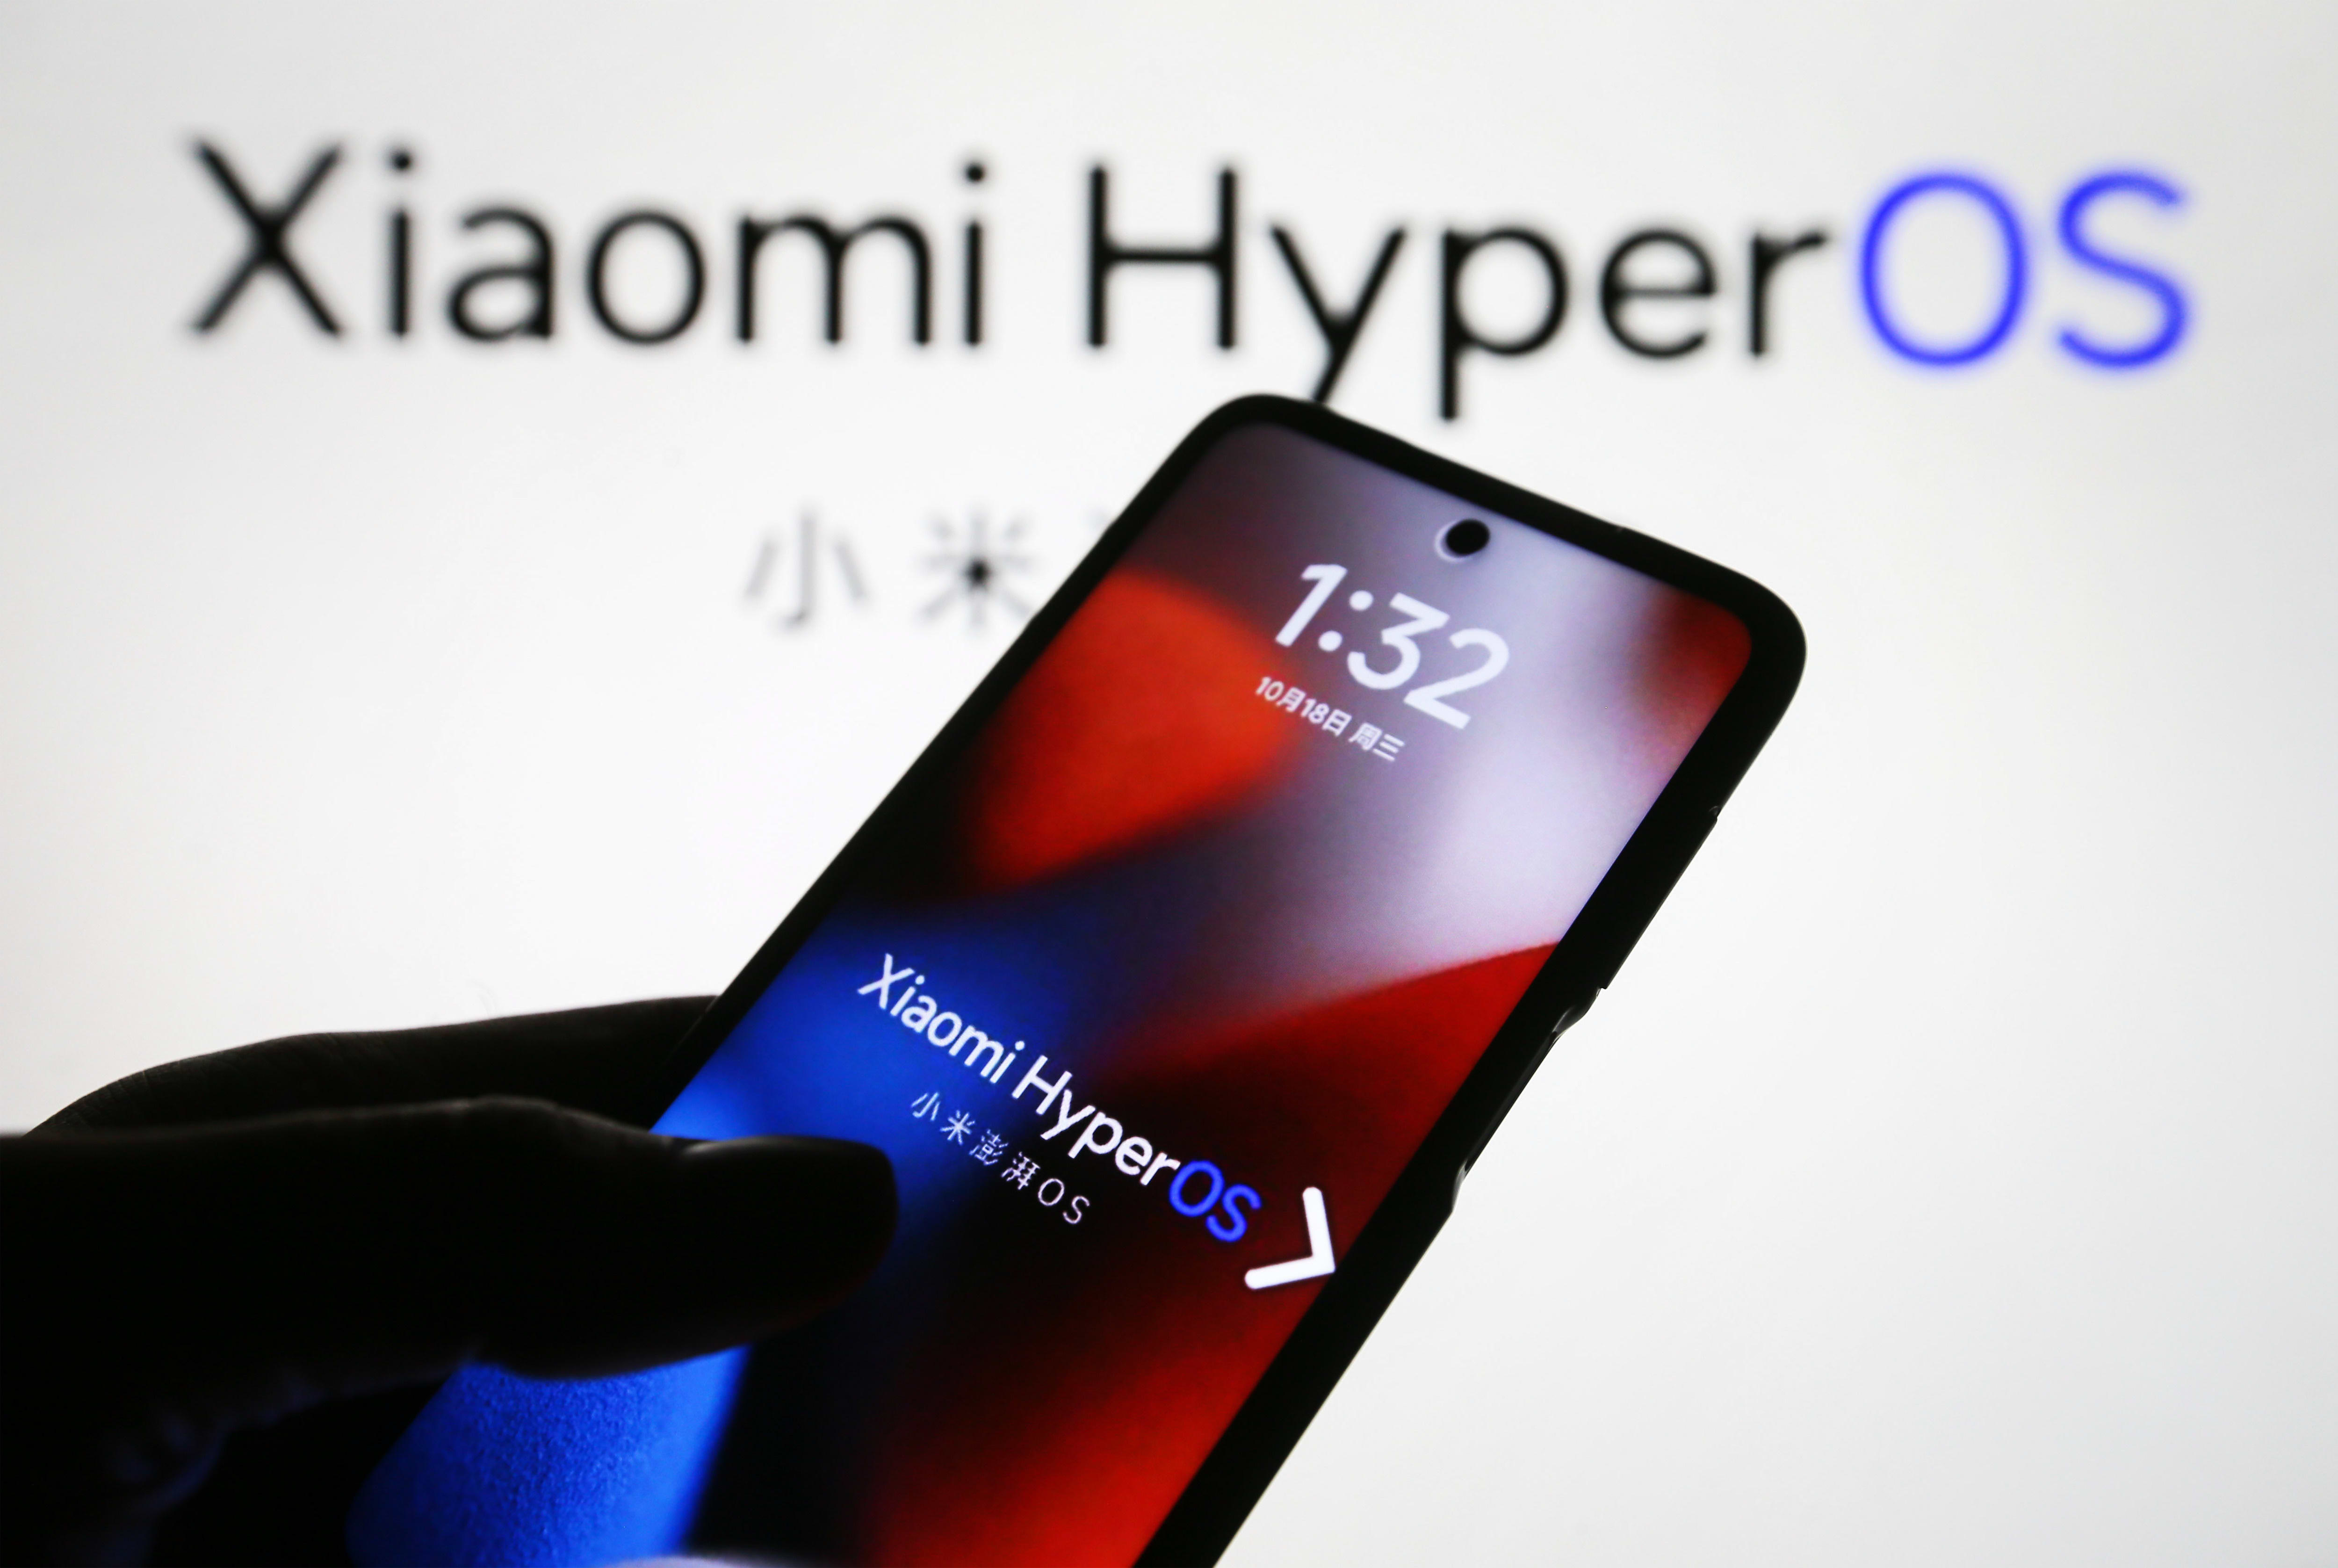 Chinese smartphone company Xiaomi launches HyperOS while planning the car